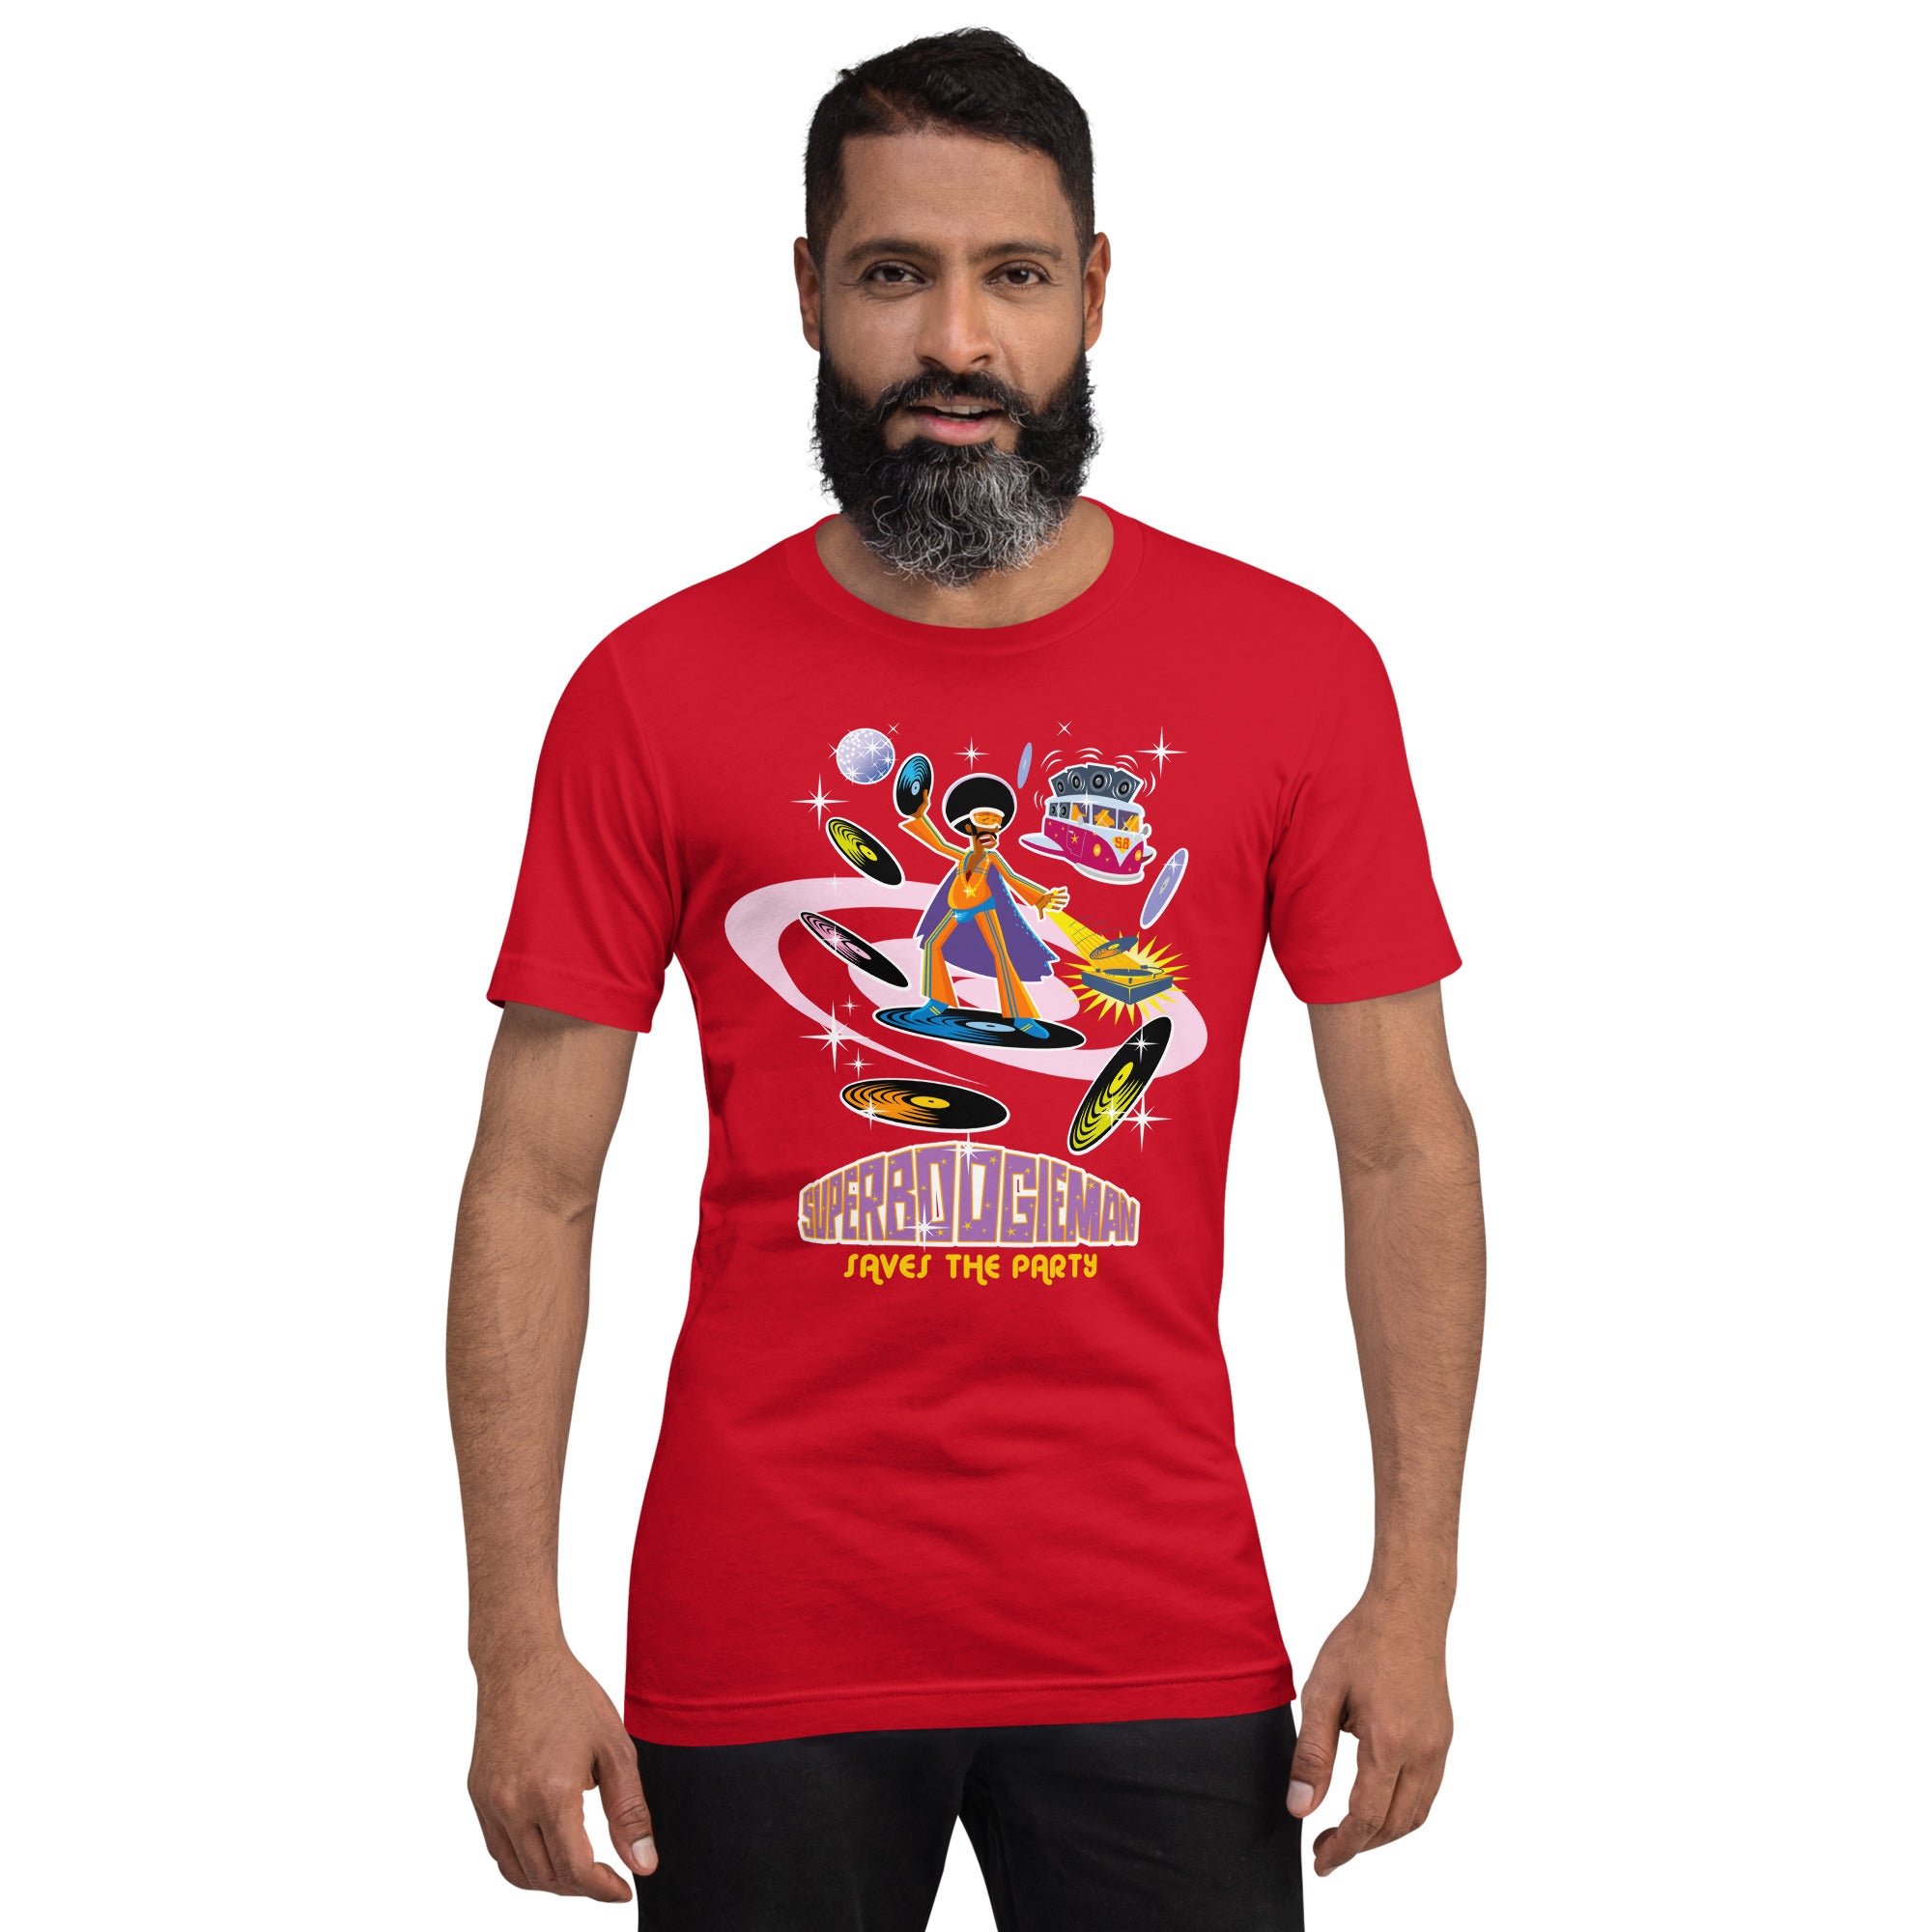 Unisex cotton t-shirt Superboogieman saves the Party on bright colors